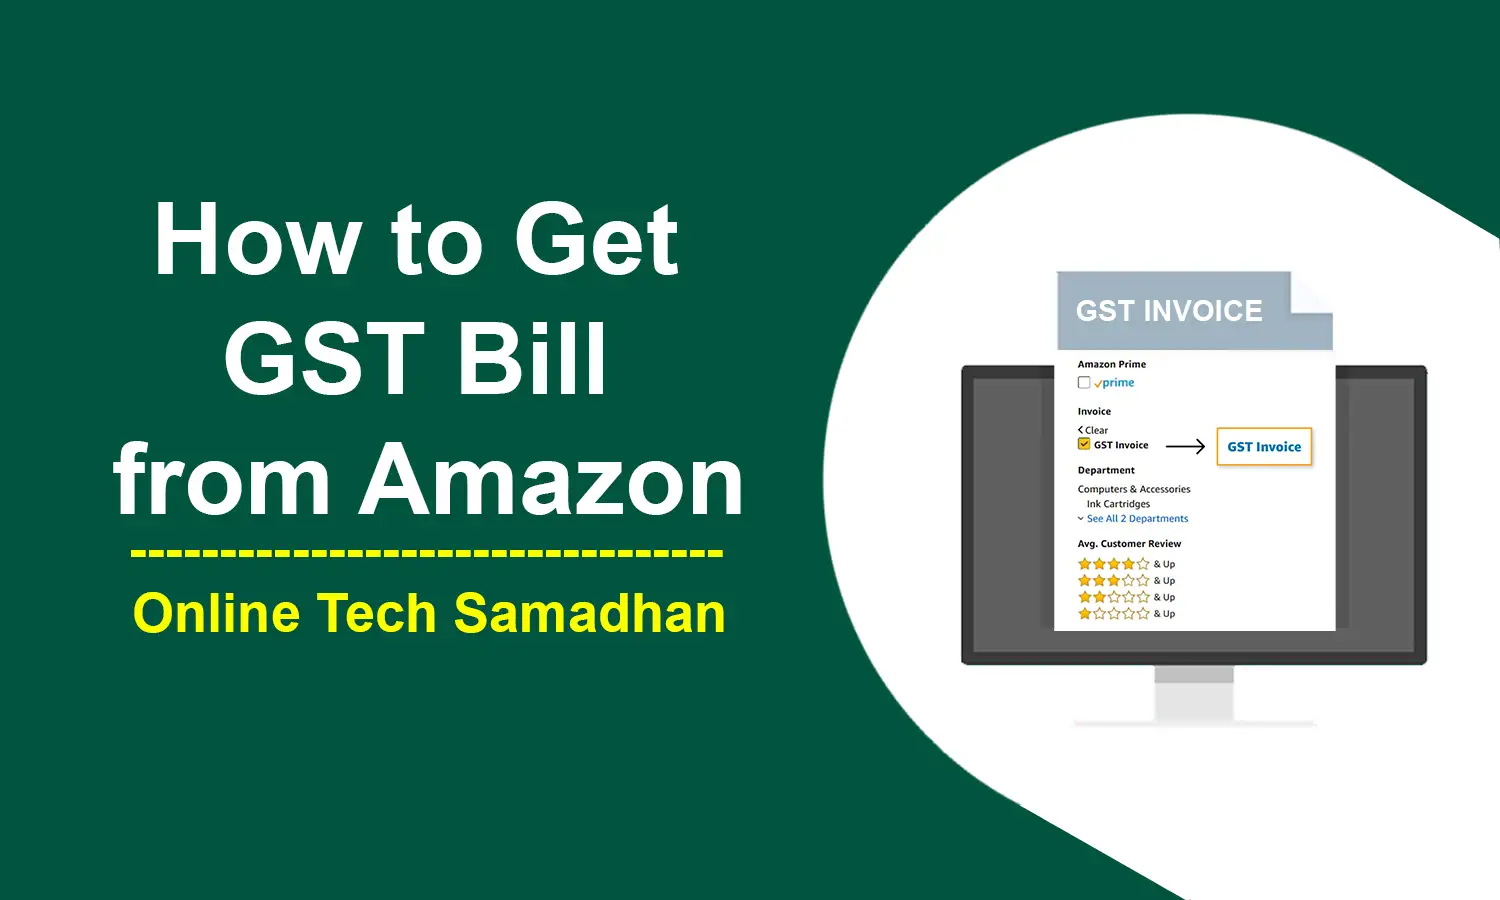 How to Get GST Bill from Amazon